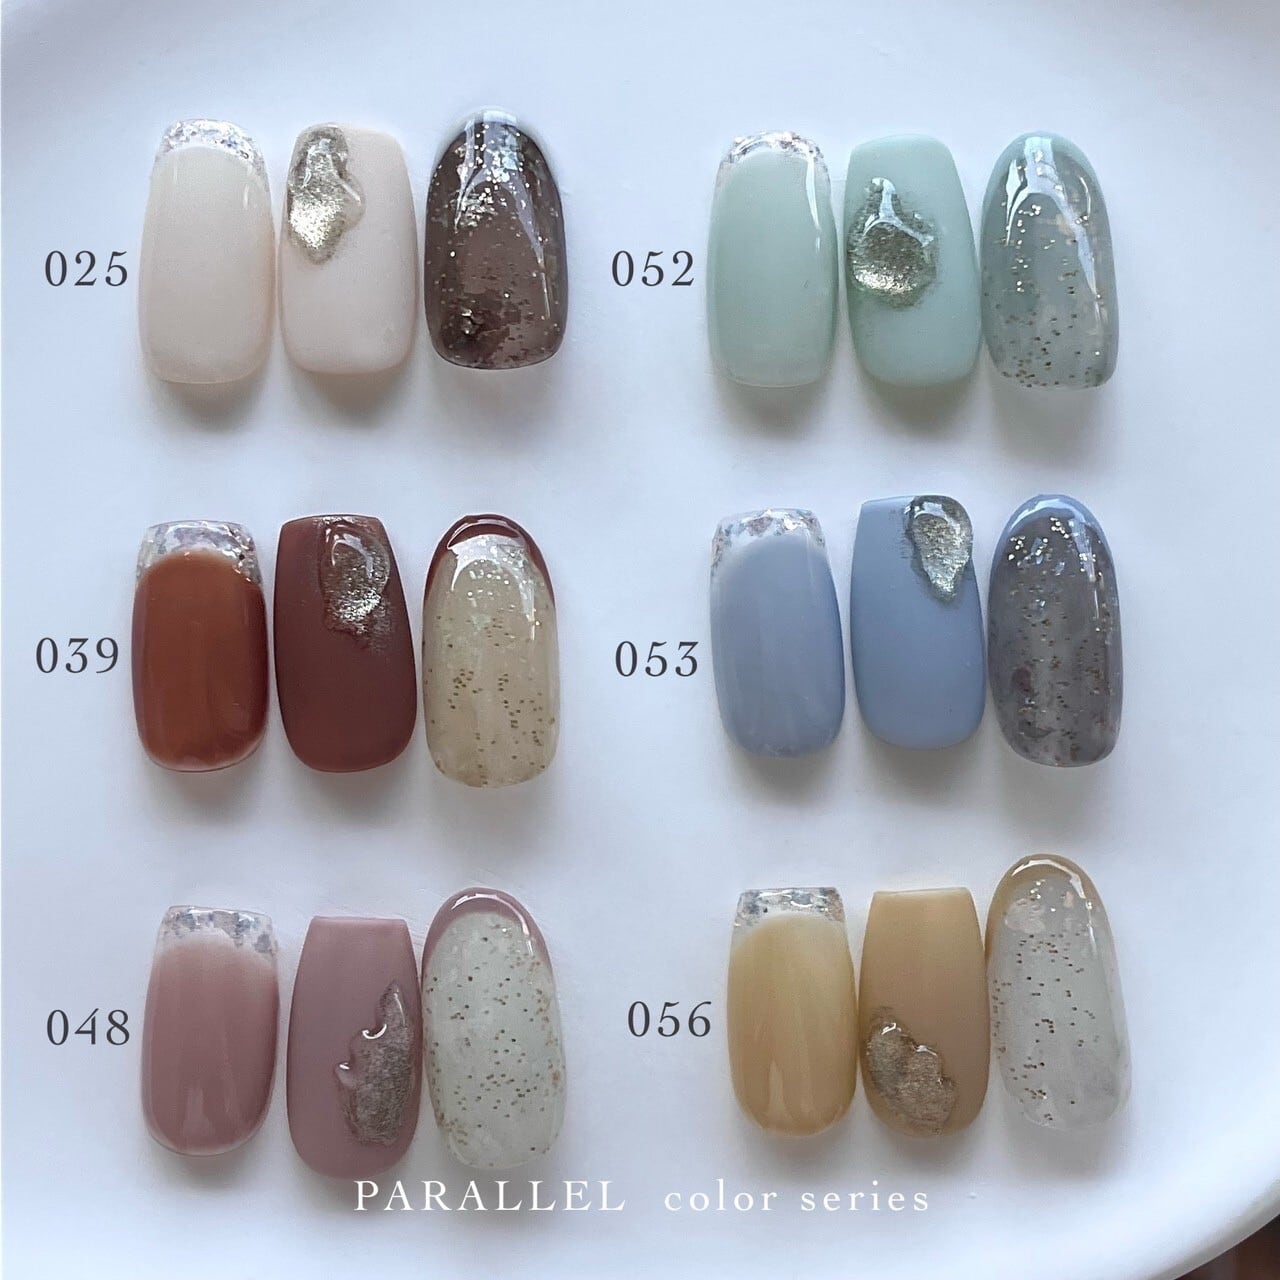 QUE Gel by Mystic Jo. - Parallel Colours (35 shades)